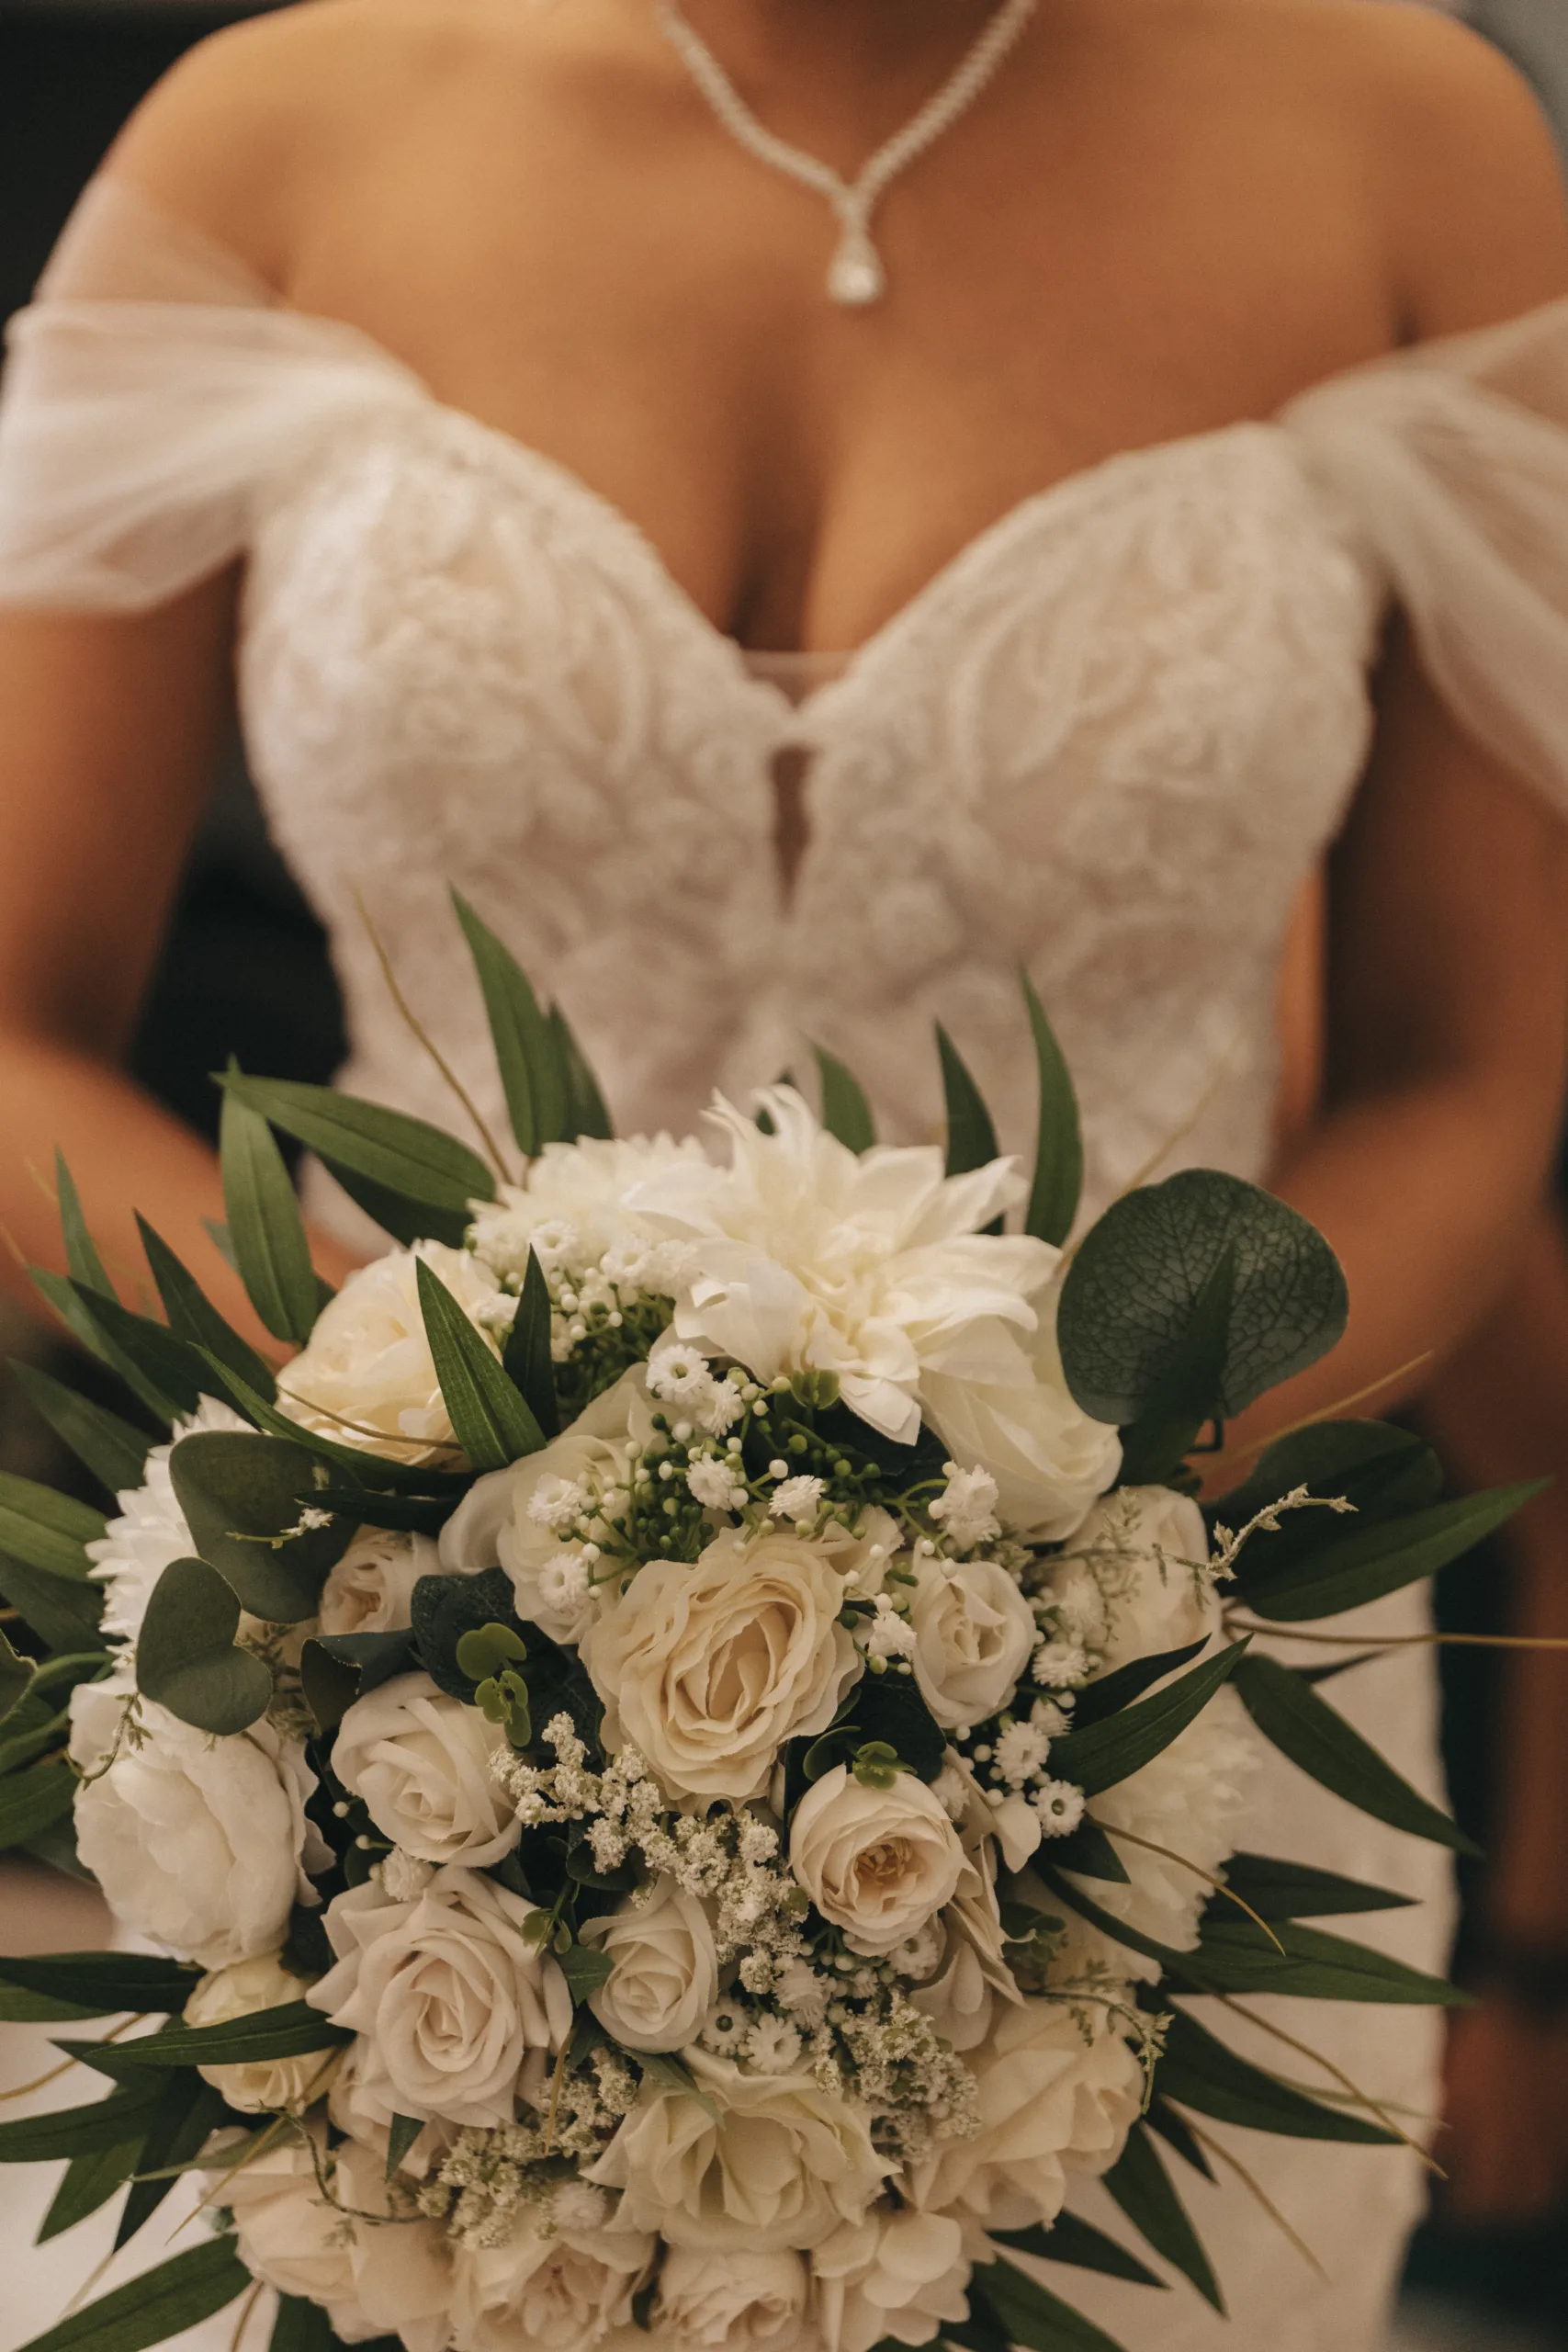 A bride holding a bouquet of white flowers on her wedding day in Yorkshire.